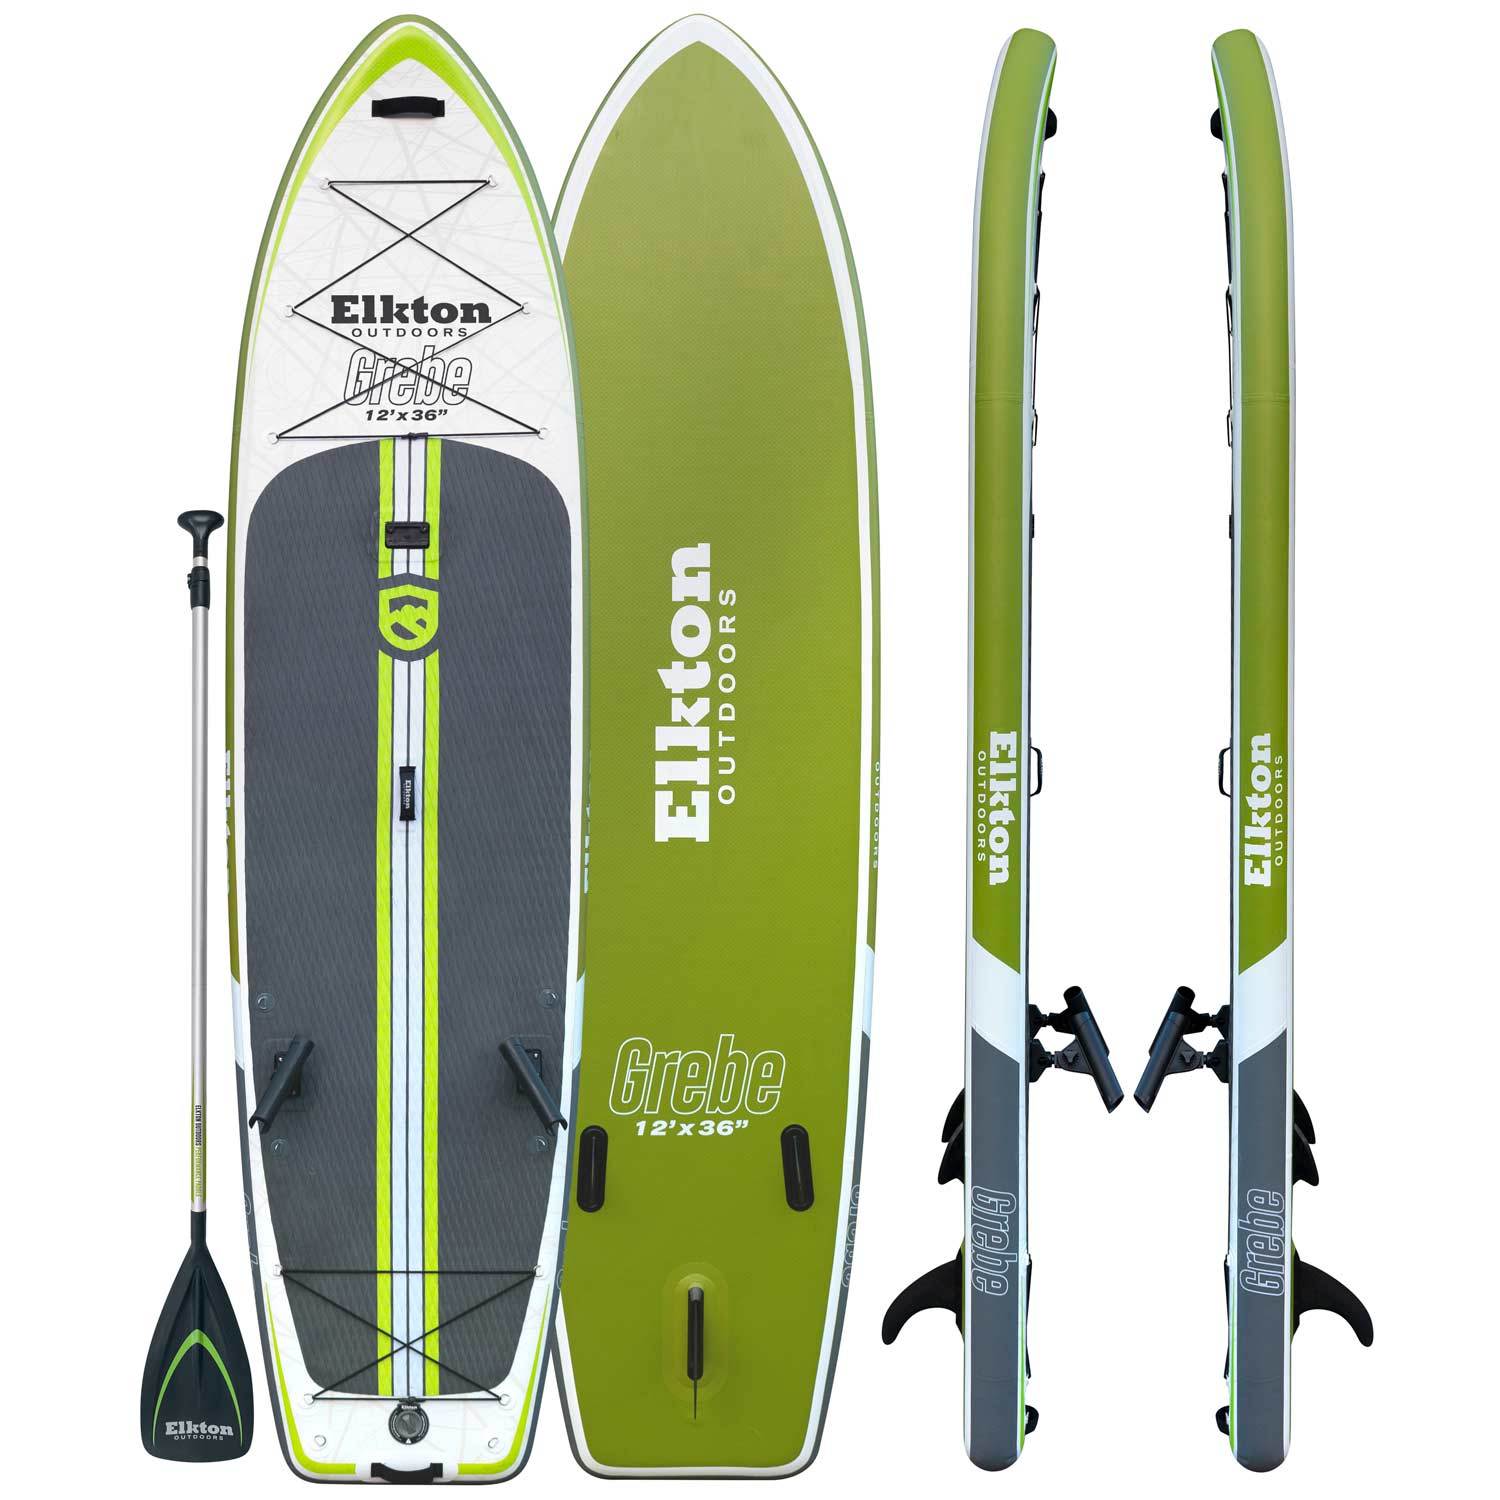 Elkton Outdoors 12' Inflatable Fishing Paddle Board Kit WIth 2